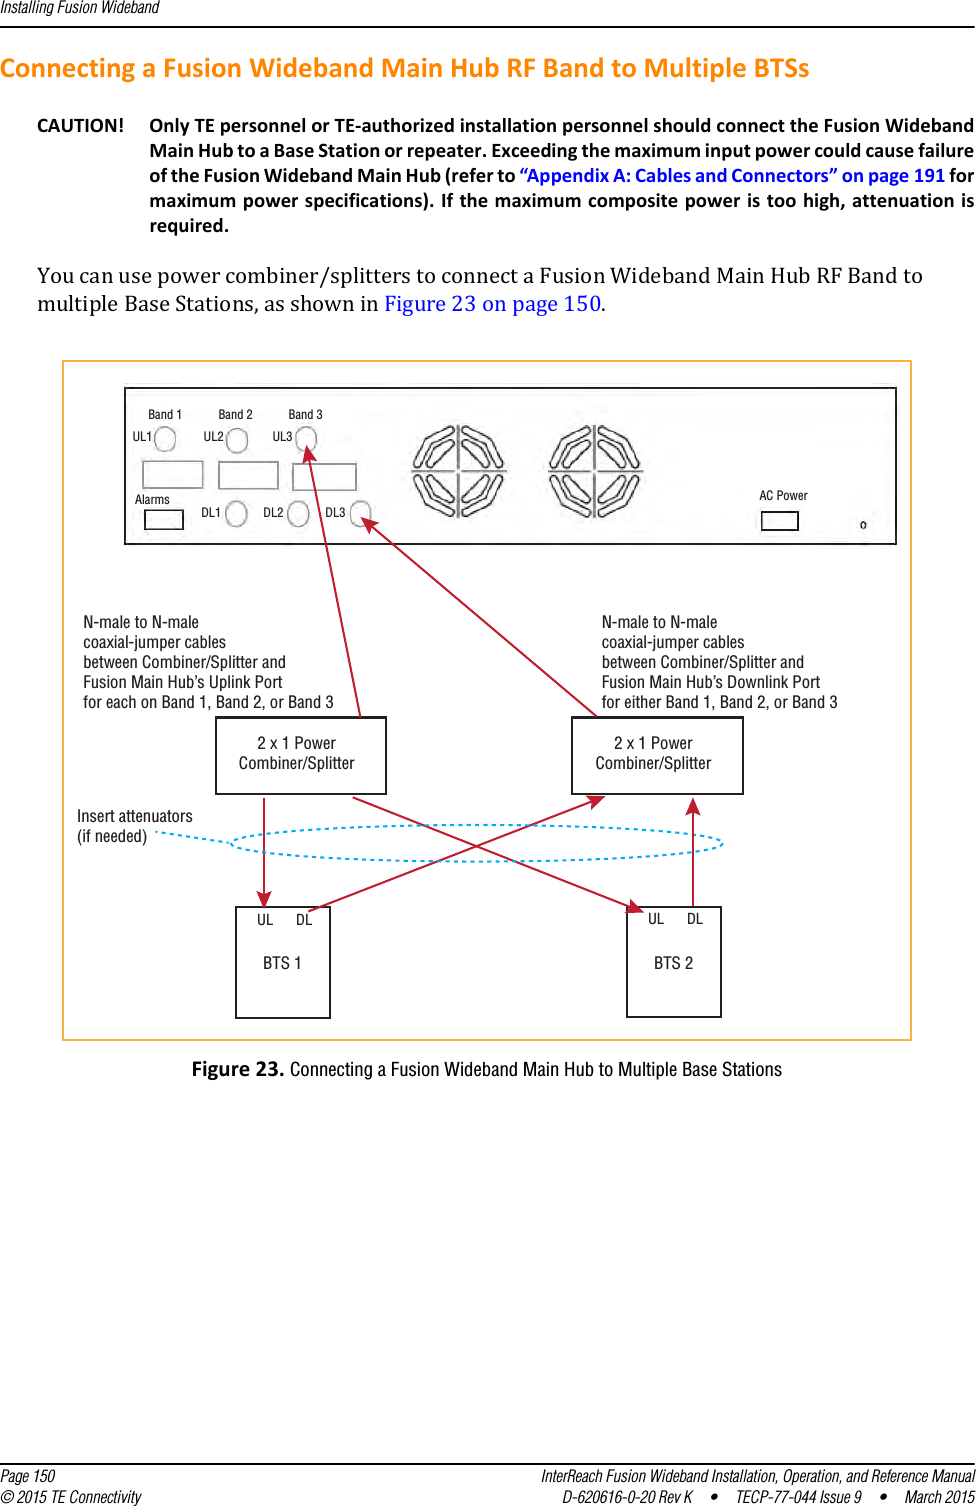 Installing Fusion Wideband  Page 150 InterReach Fusion Wideband Installation, Operation, and Reference Manual© 2015 TE Connectivity D-620616-0-20 Rev K  •  TECP-77-044 Issue 9  •  March 2015Connecting a Fusion Wideband Main Hub RF Band to Multiple BTSsCAUTION! Only TE personnel or TE-authorized installation personnel should connect the Fusion Wideband Main Hub to a Base Station or repeater. Exceeding the maximum input power could cause failure of the Fusion Wideband Main Hub (refer to “Appendix A: Cables and Connectors” on page 191 for maximum power specifications). If the maximum composite power is too high, attenuation is required.You can use power combiner/splitters to connect a Fusion Wideband Main Hub RF Band to multiple Base Stations, as shown in Figure 23 on page 150.Figure 23. Connecting a Fusion Wideband Main Hub to Multiple Base StationsBand 1 Band 2 Band 3UL1 UL2 UL3AlarmsDL1 DL2 DL3AC PowerInsert attenuators(if needed)2 x 1 PowerCombiner/SplitterN-male to N-malecoaxial-jumper cablesbetween Combiner/Splitter andFusion Main Hub’s Uplink Portfor each on Band 1, Band 2, or Band 32 x 1 PowerCombiner/SplitterN-male to N-malecoaxial-jumper cablesbetween Combiner/Splitter andFusion Main Hub’s Downlink Portfor either Band 1, Band 2, or Band 3BTS 1UL DLBTS 2UL DL